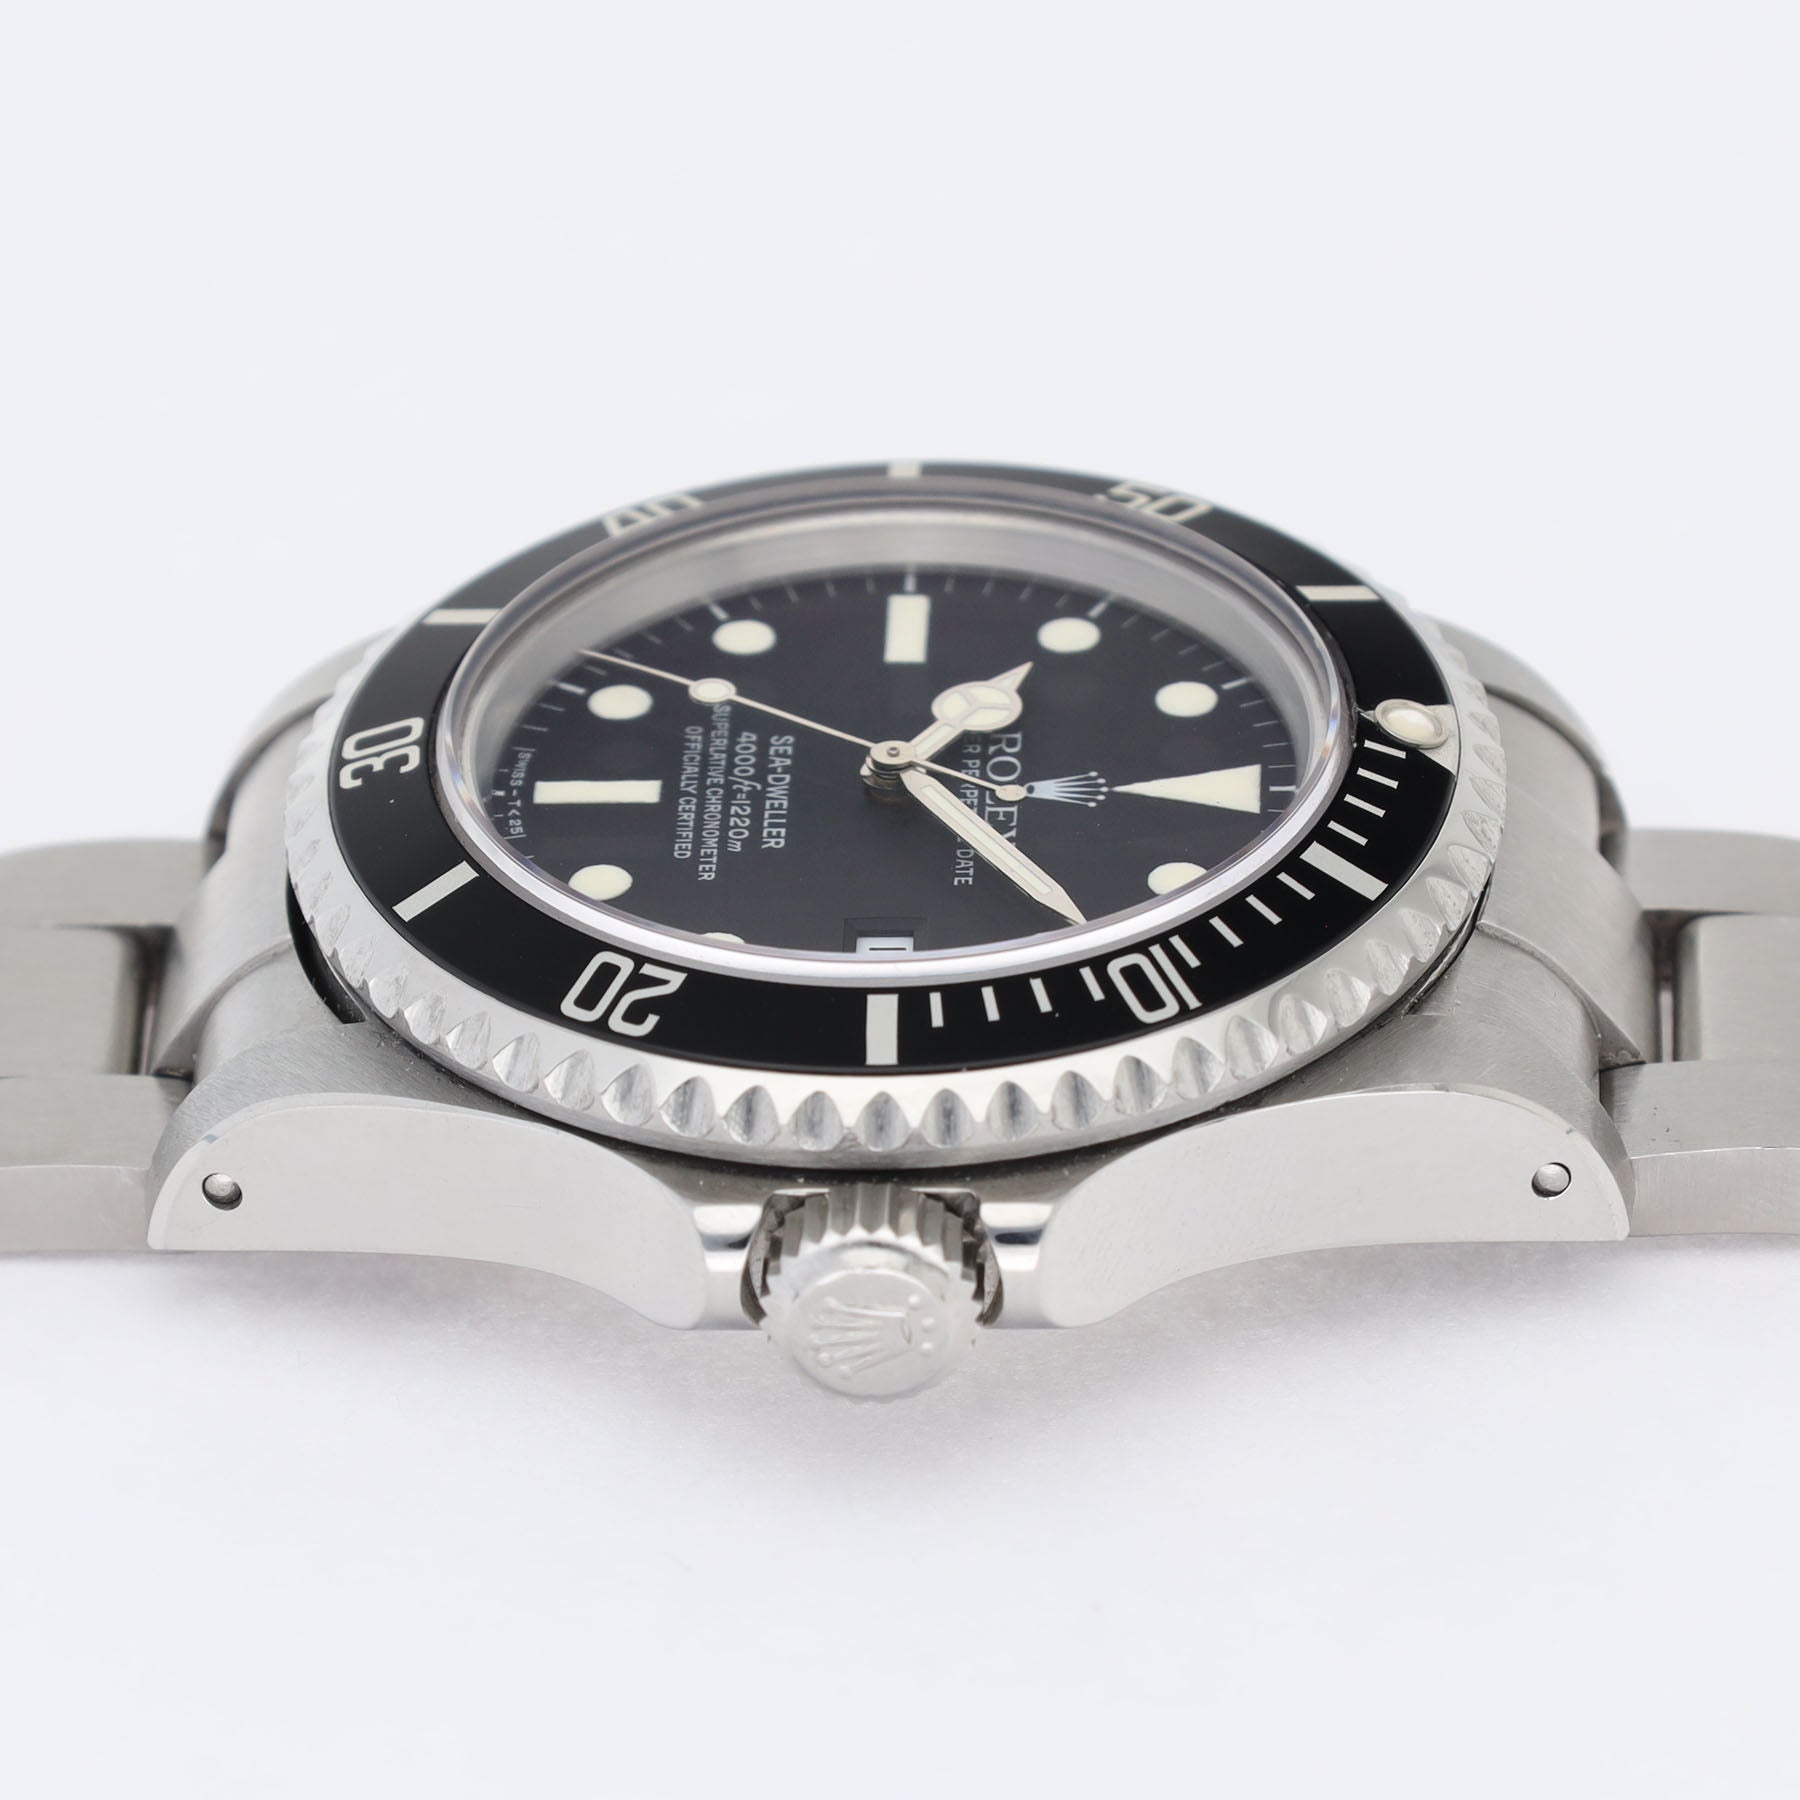 Rolex Seadweller 16660 Matte Dial Box and Papers